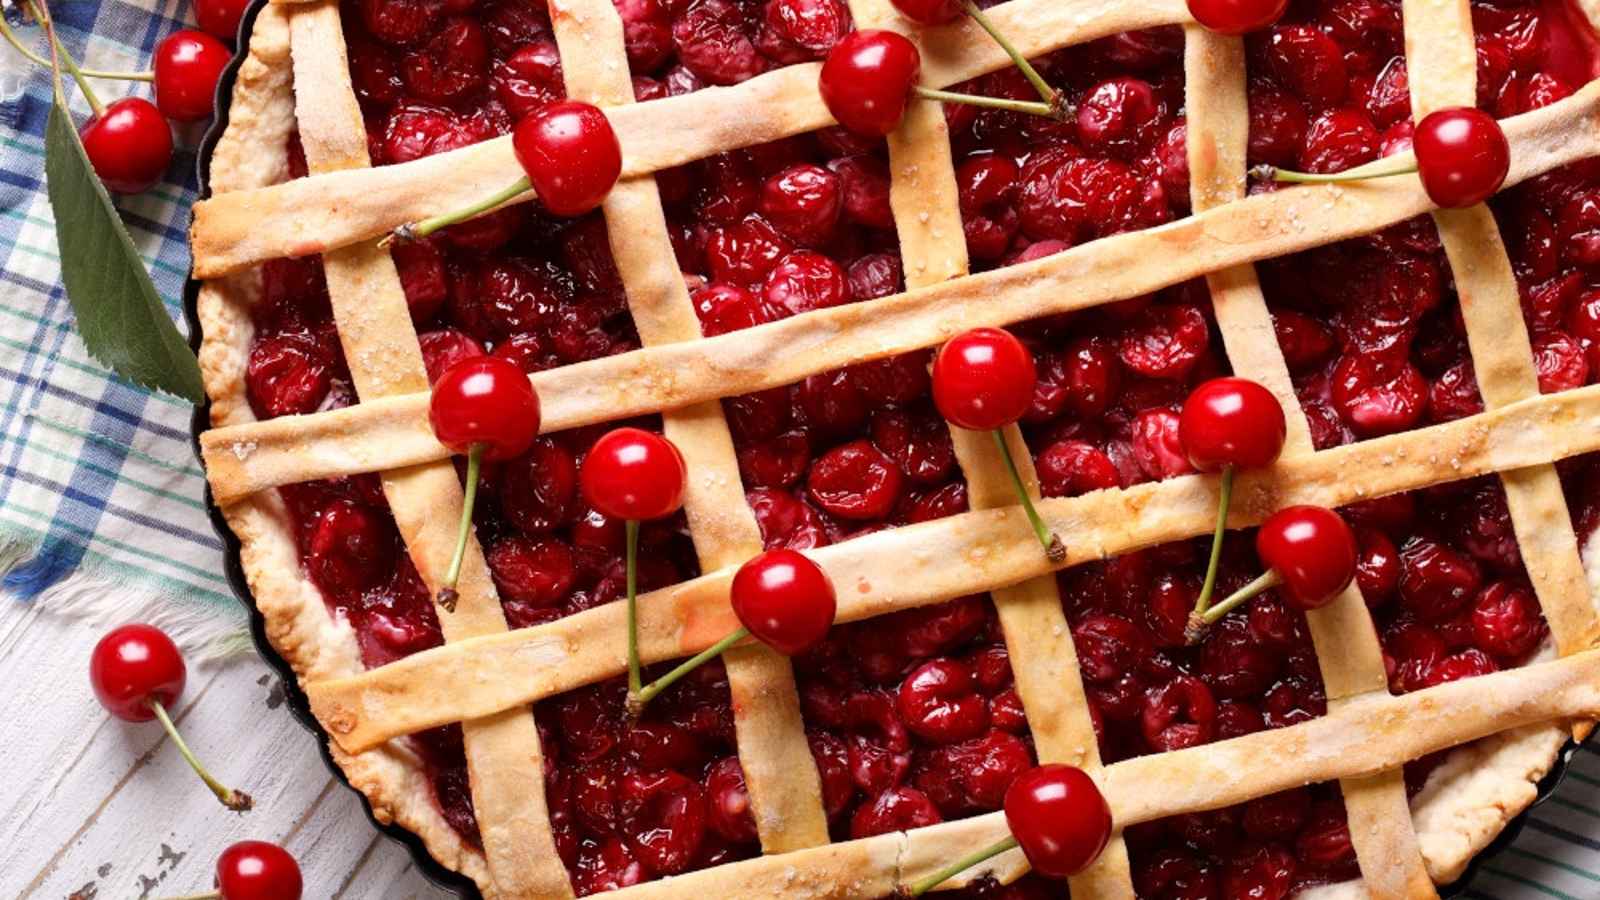 National Cherry Tart Day 2023: Date, History, Facts about Tarts